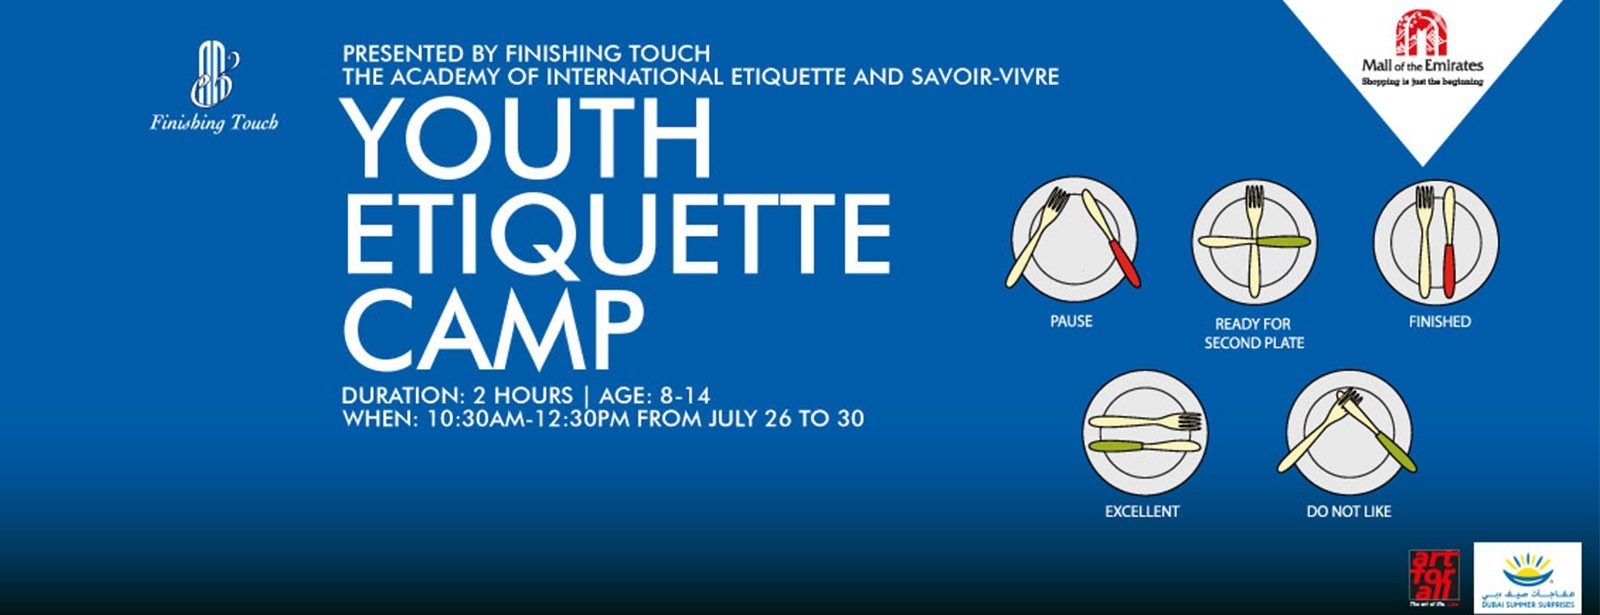 Youth Etiquette Camp: Table Manners - Coming Soon in UAE